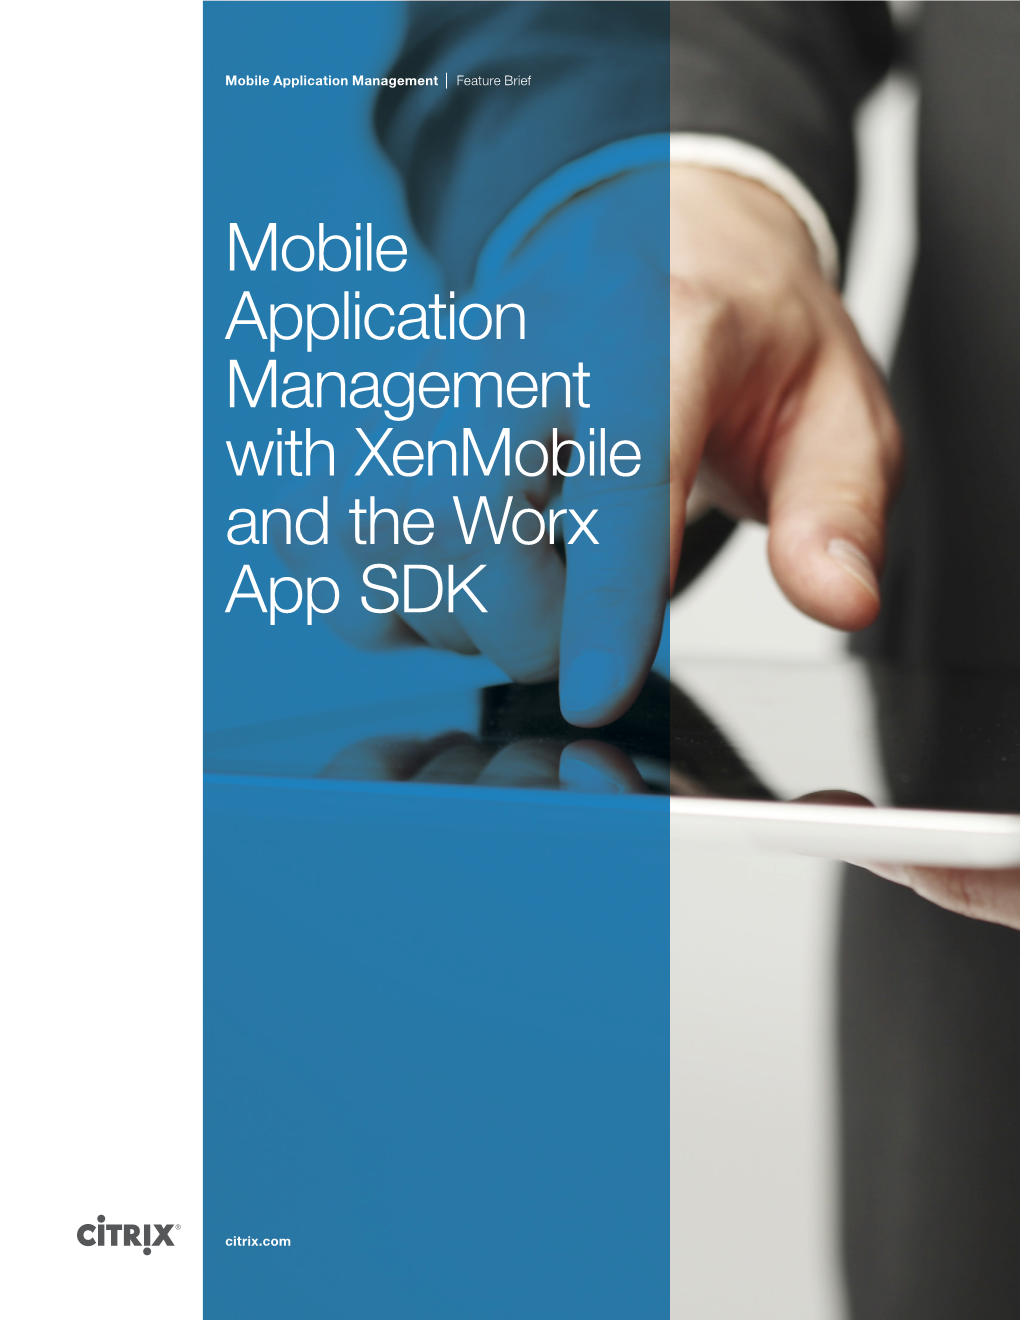 Mobile Application Management with Xenmobile and the Worx App SDK